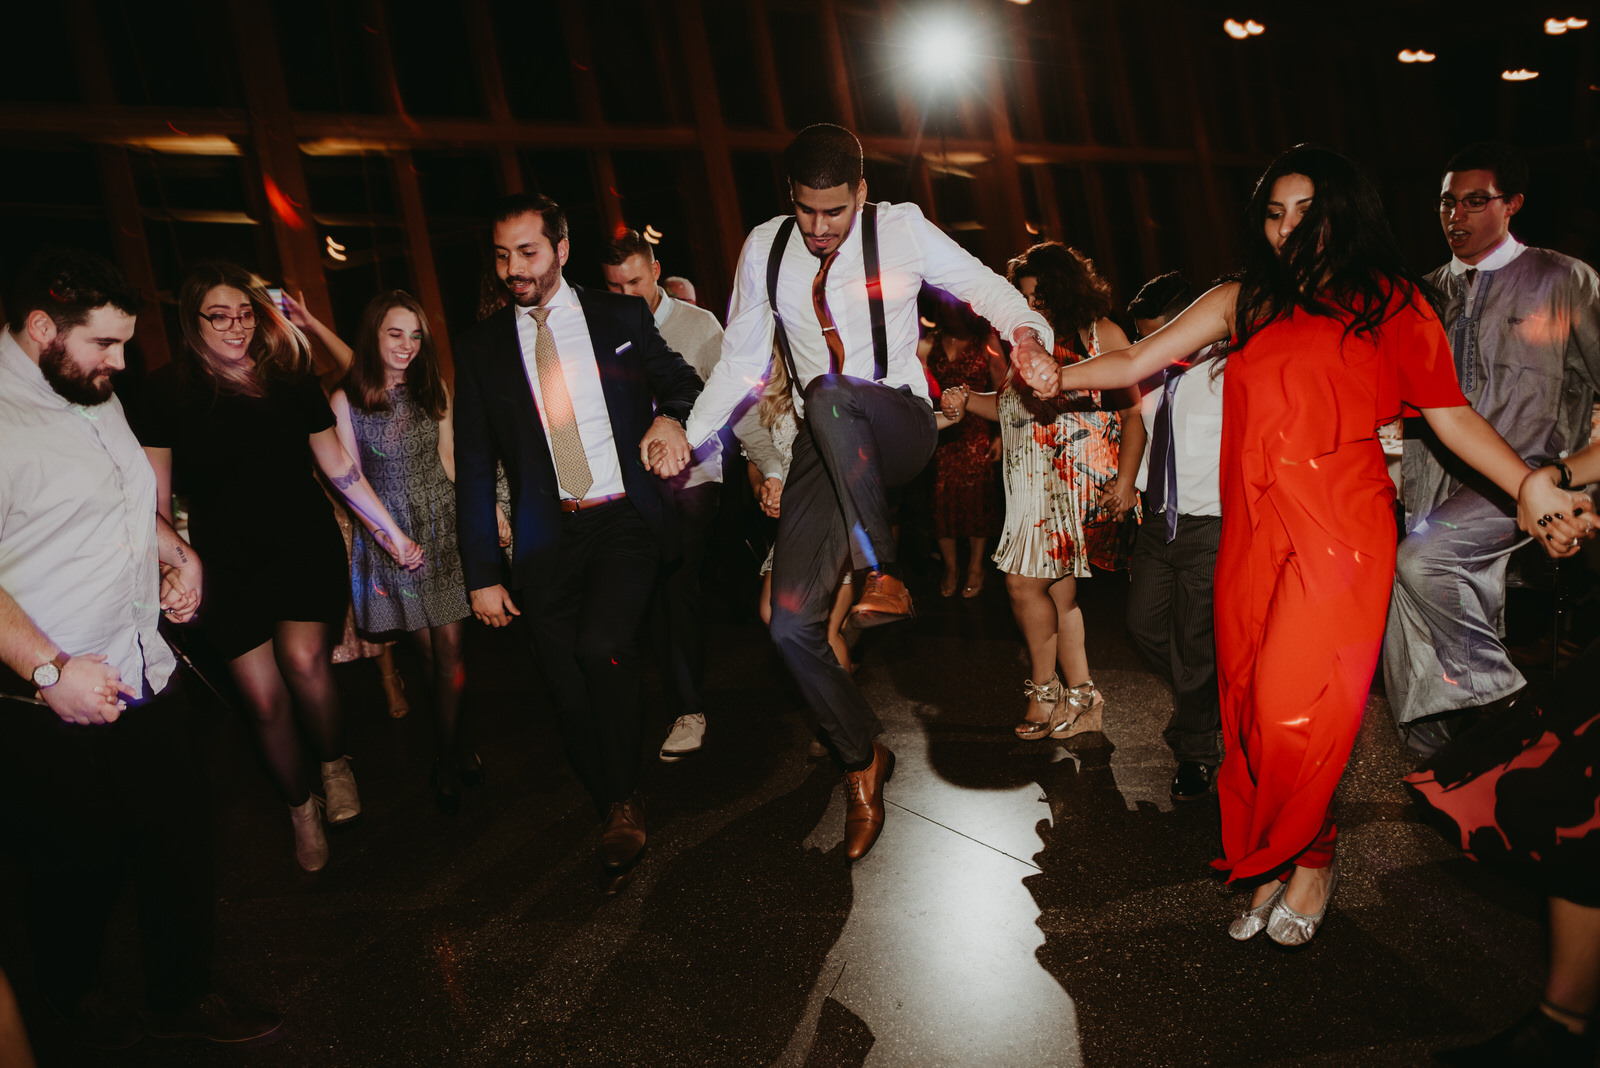 Crazy egyptian dance party, Bissell tree house Michigan, moody photography, Chicago wedding photography - The Adamkovi